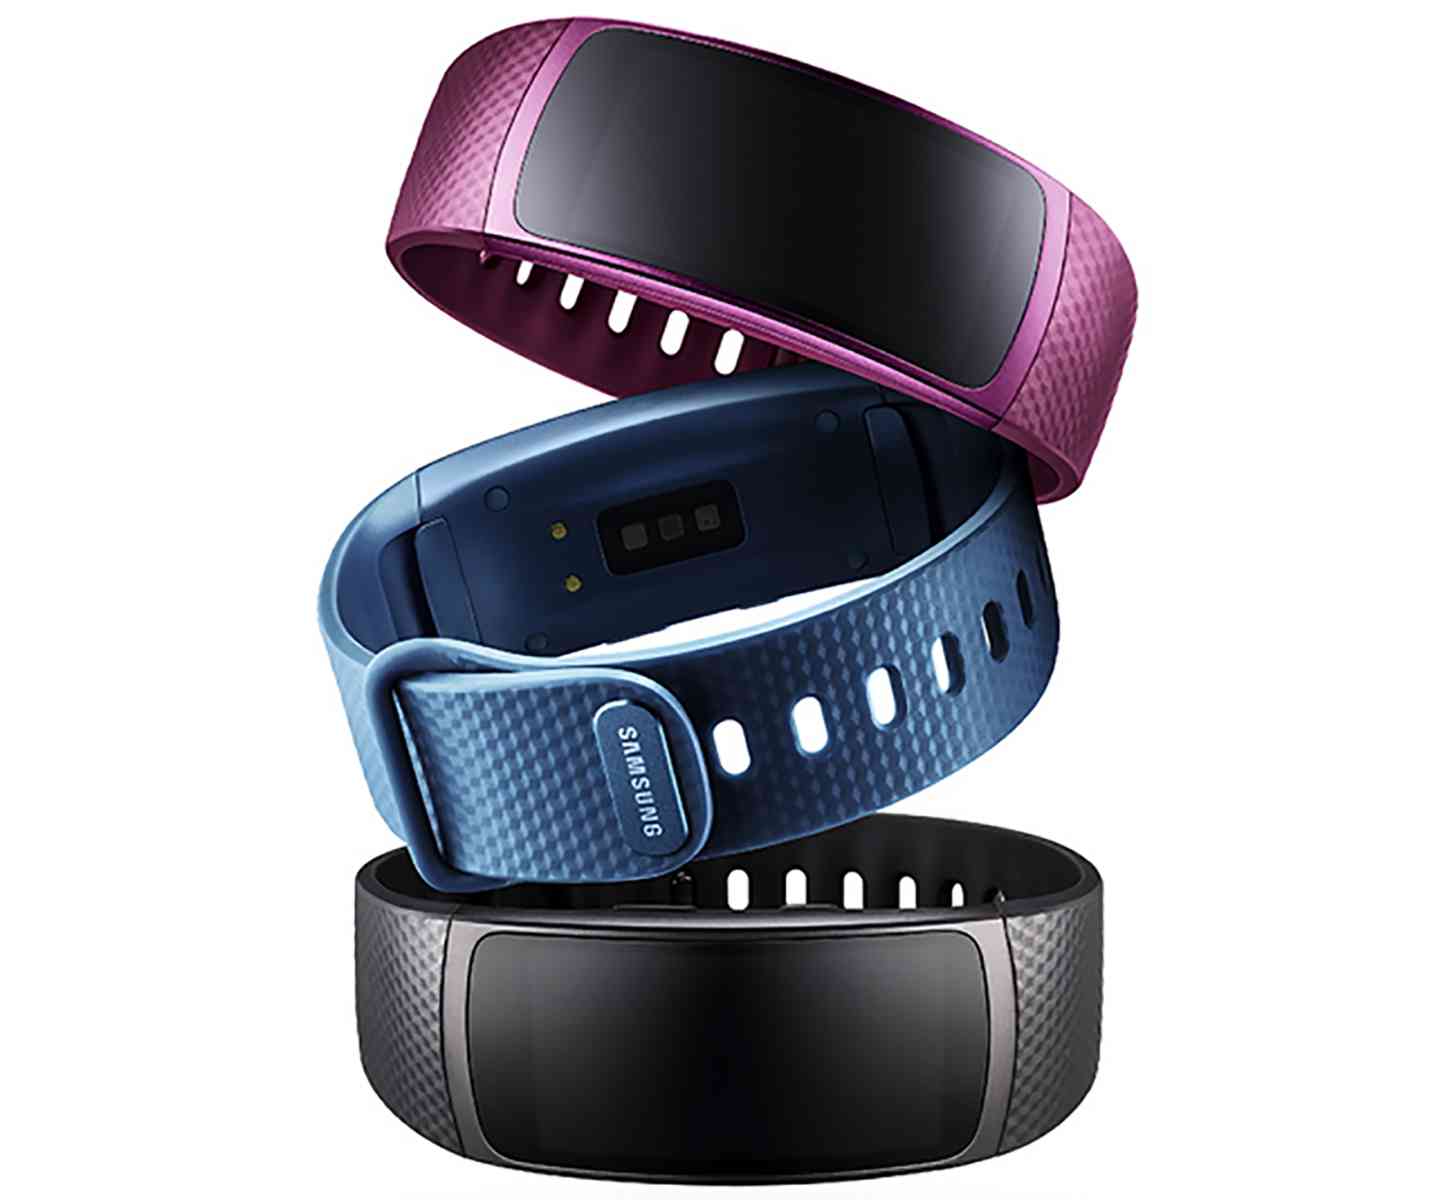 Samsung Gear Fit 2 official colors